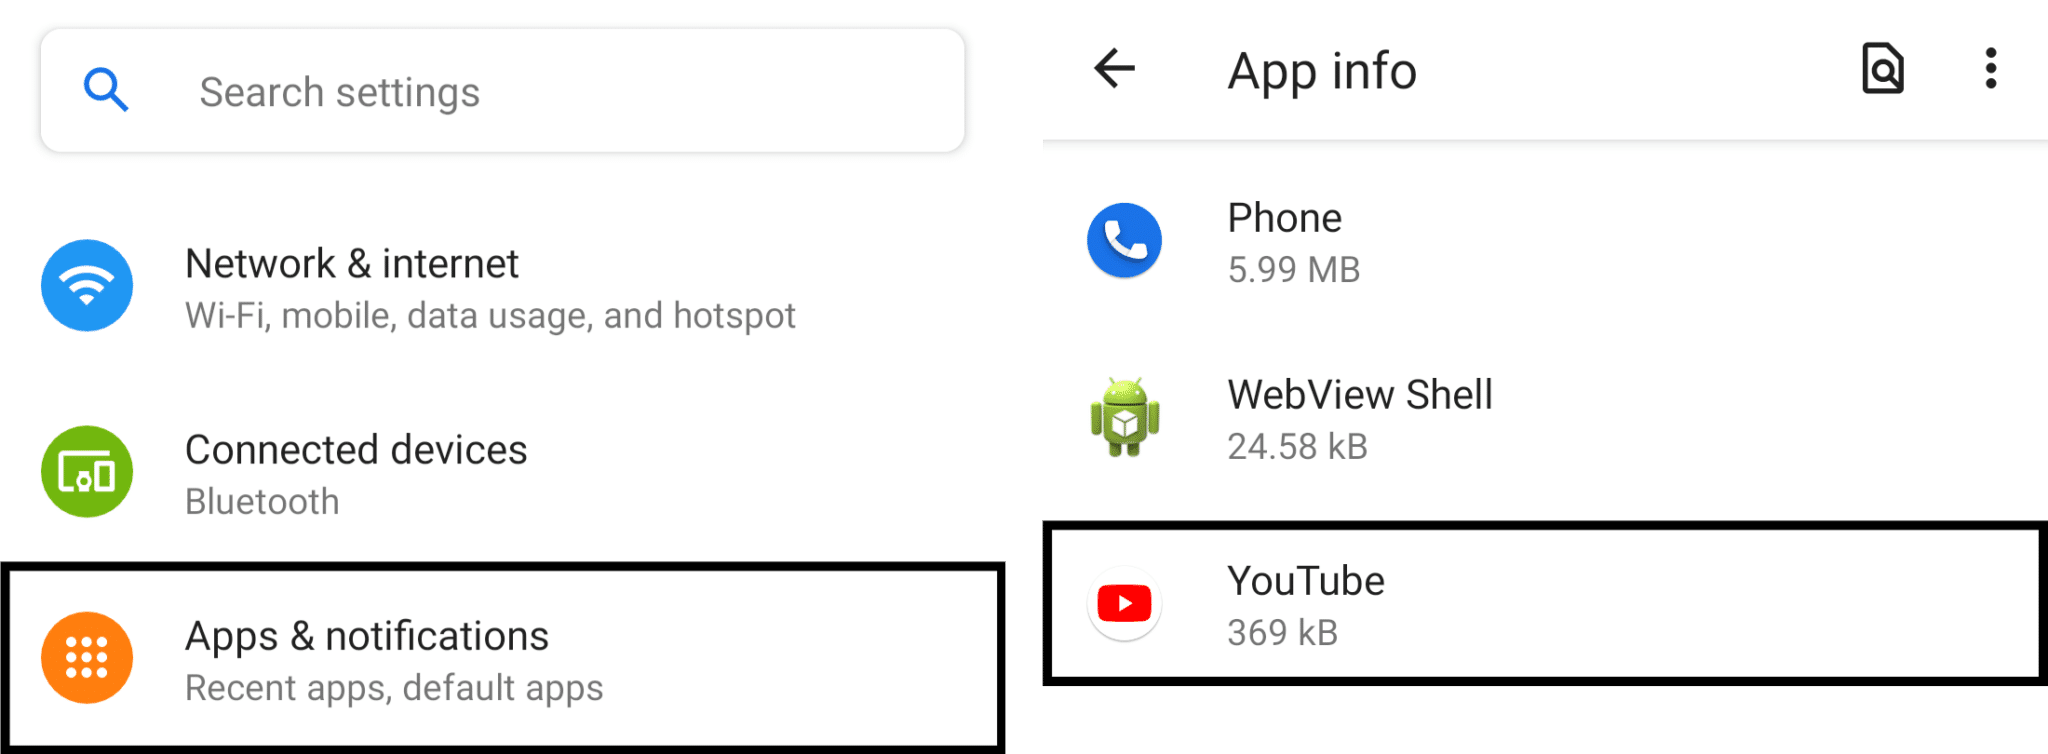 clear youtube app data on Android to fix YouTube comments not showing